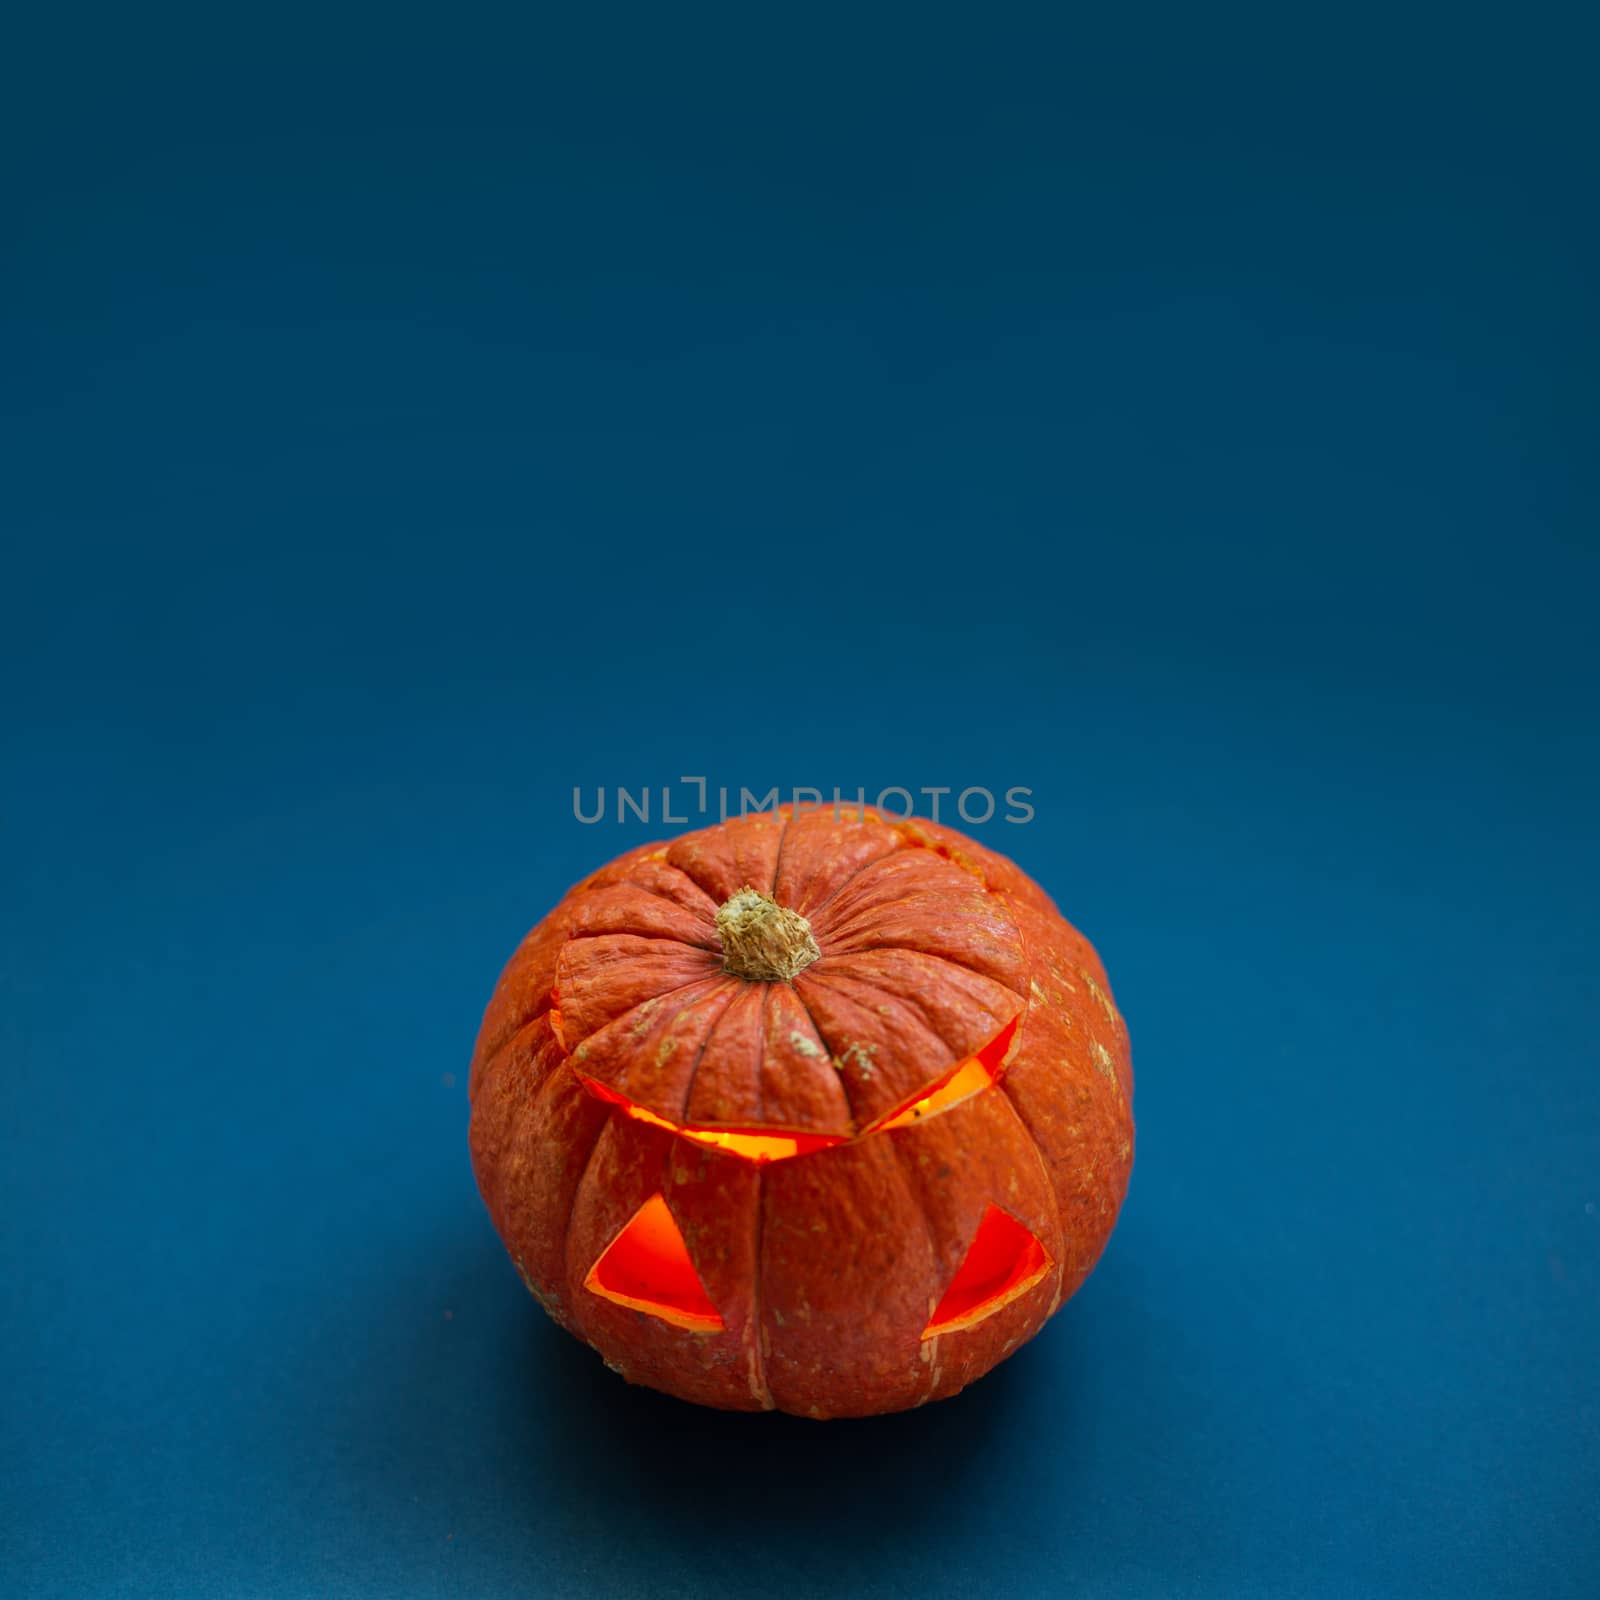 Halloween pumpkin on blue background unusual composition background with copy space for text